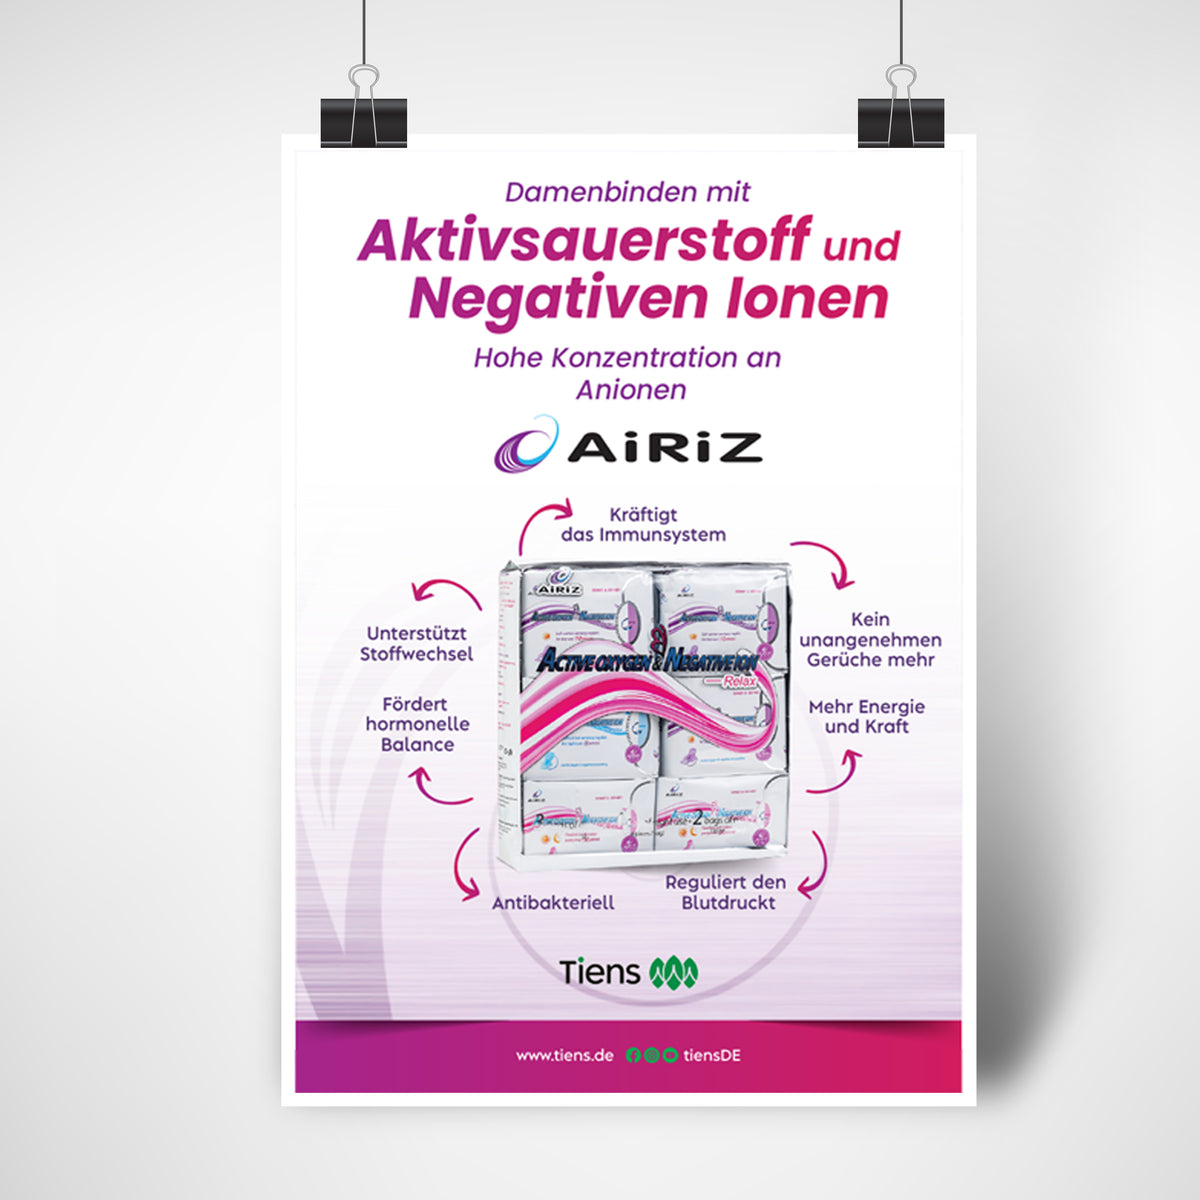 Airiz sanitary pads flyer DIN A3 (29.7 cm x 42.0 cm), printed on one side